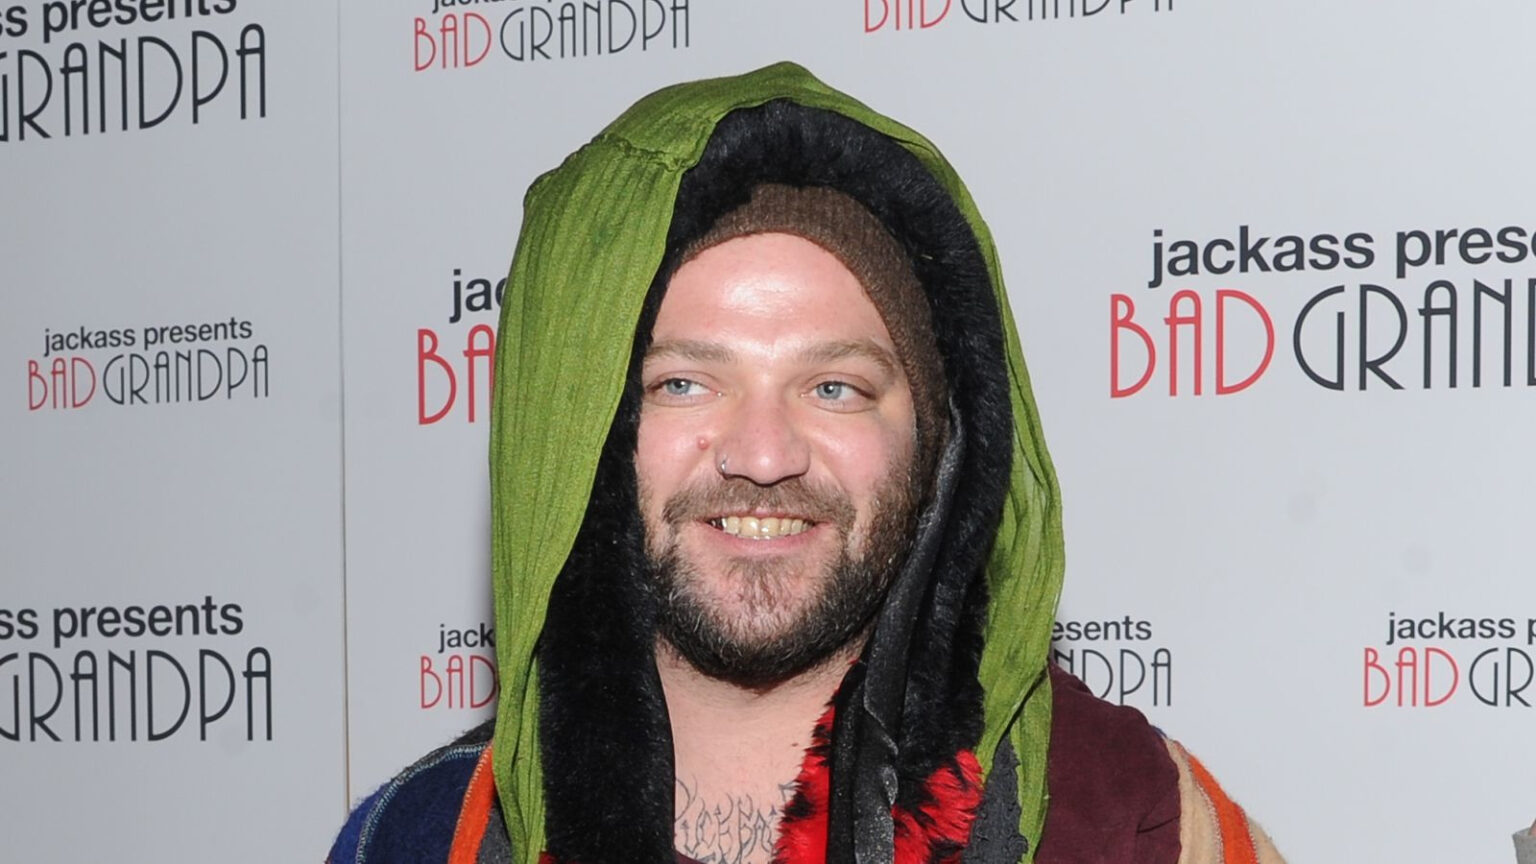 Promotion for the upcoming 'Jackass 4' is about to kick off. But no Bam Margera? Discover why the skateboarder was booted from the film.